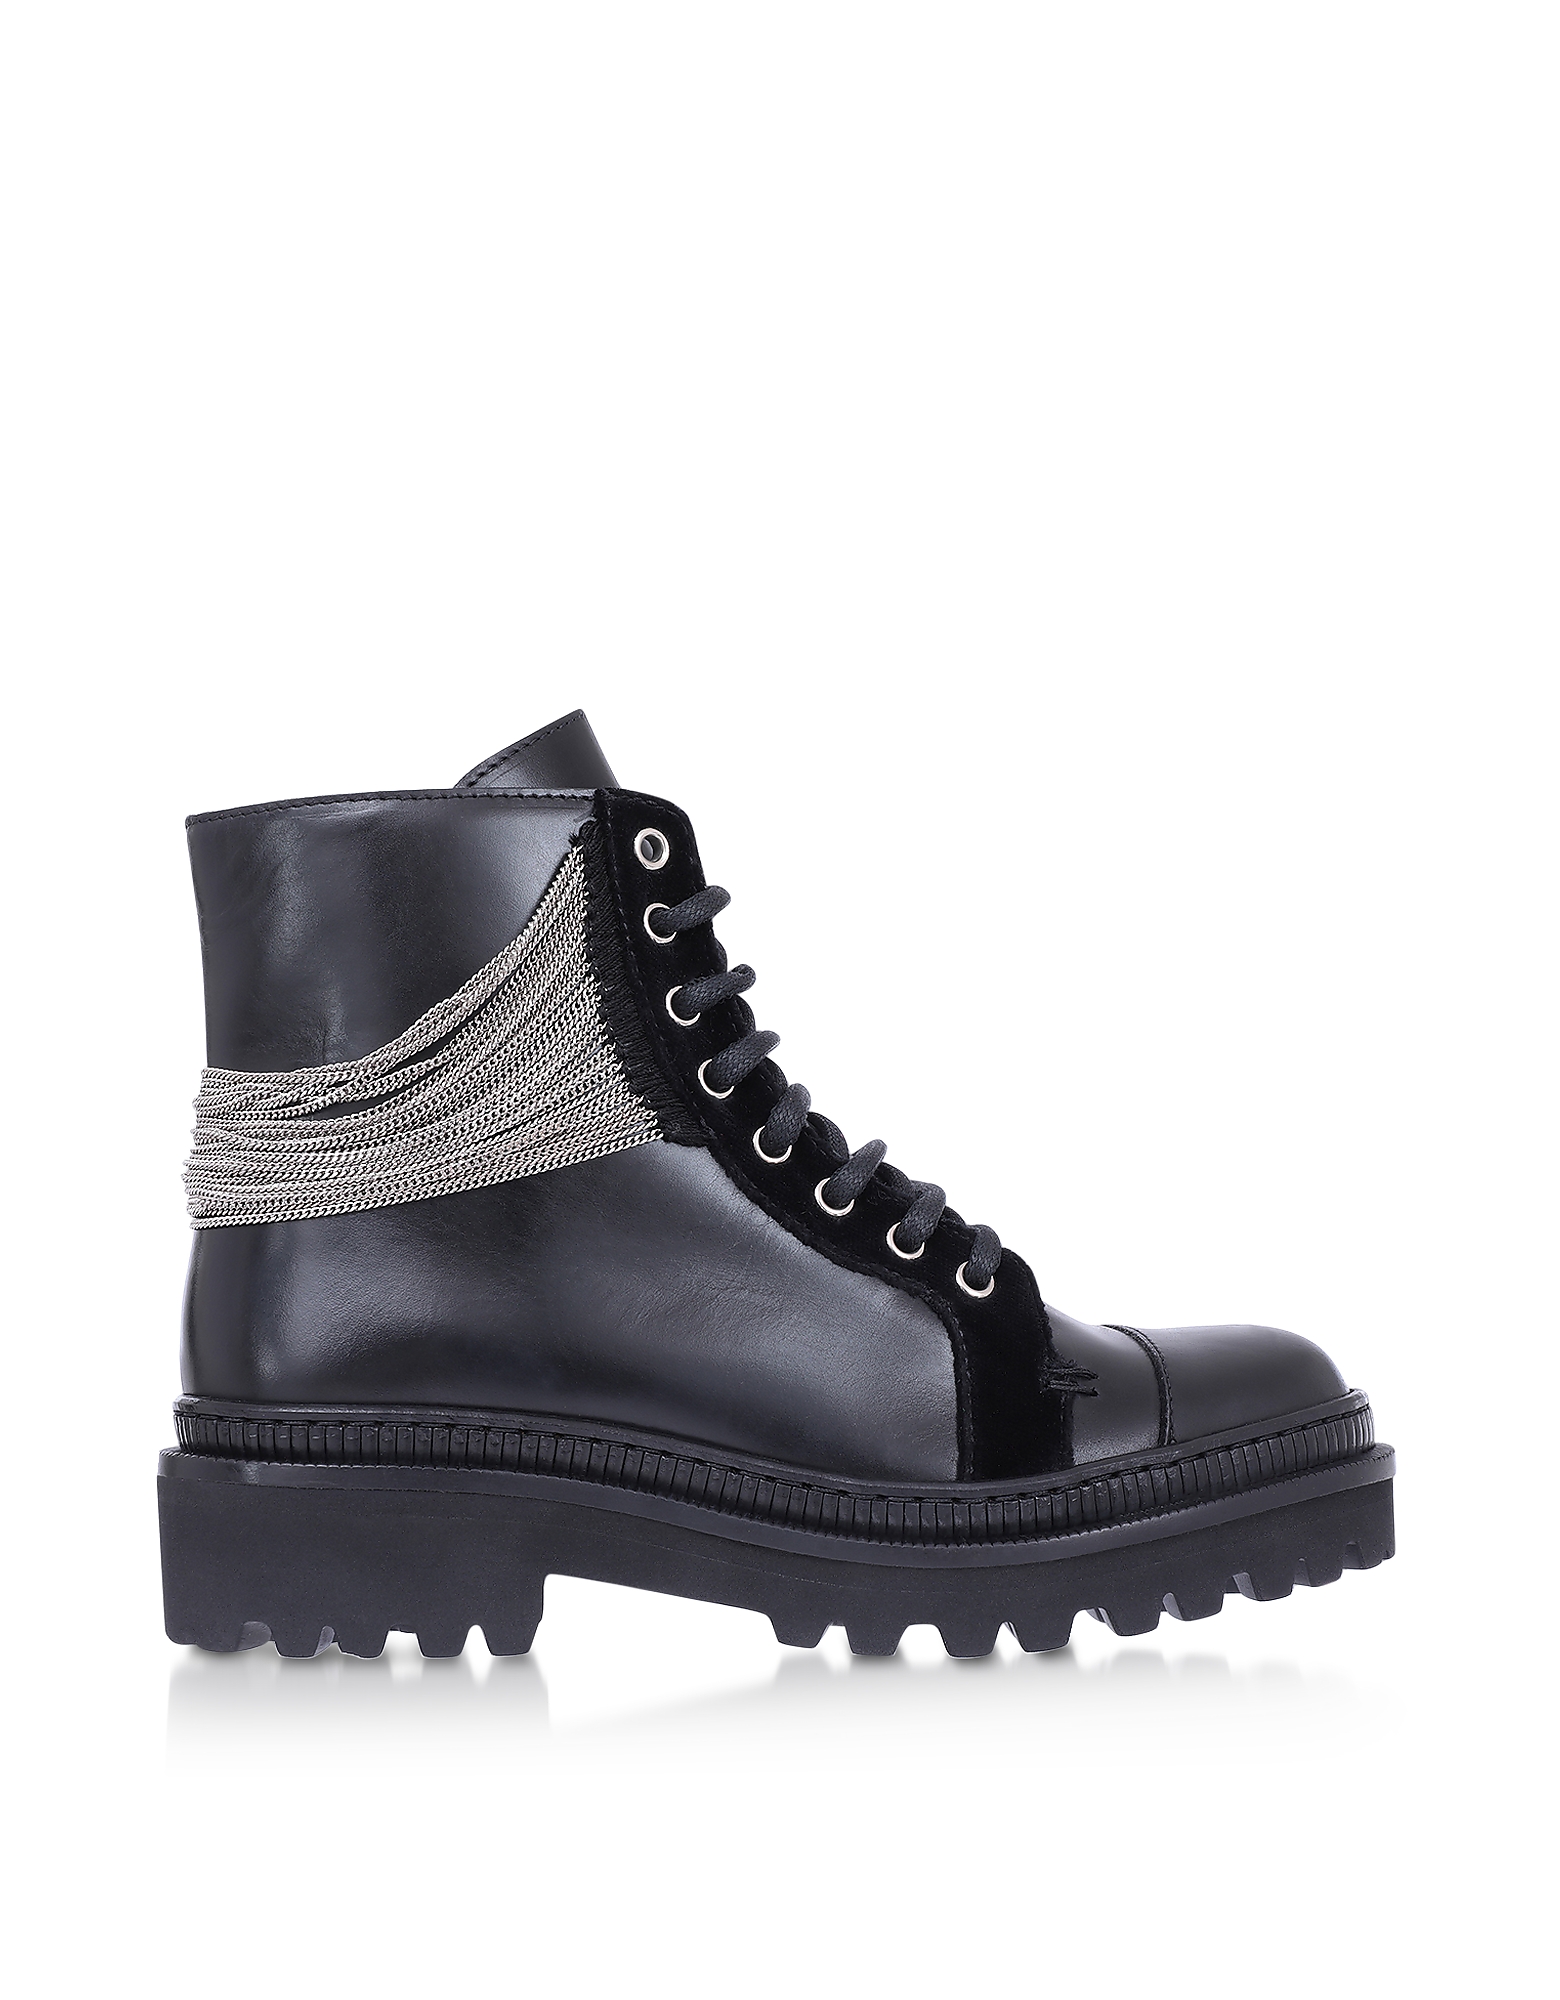 

Black Leather & Chain Ranger Boots